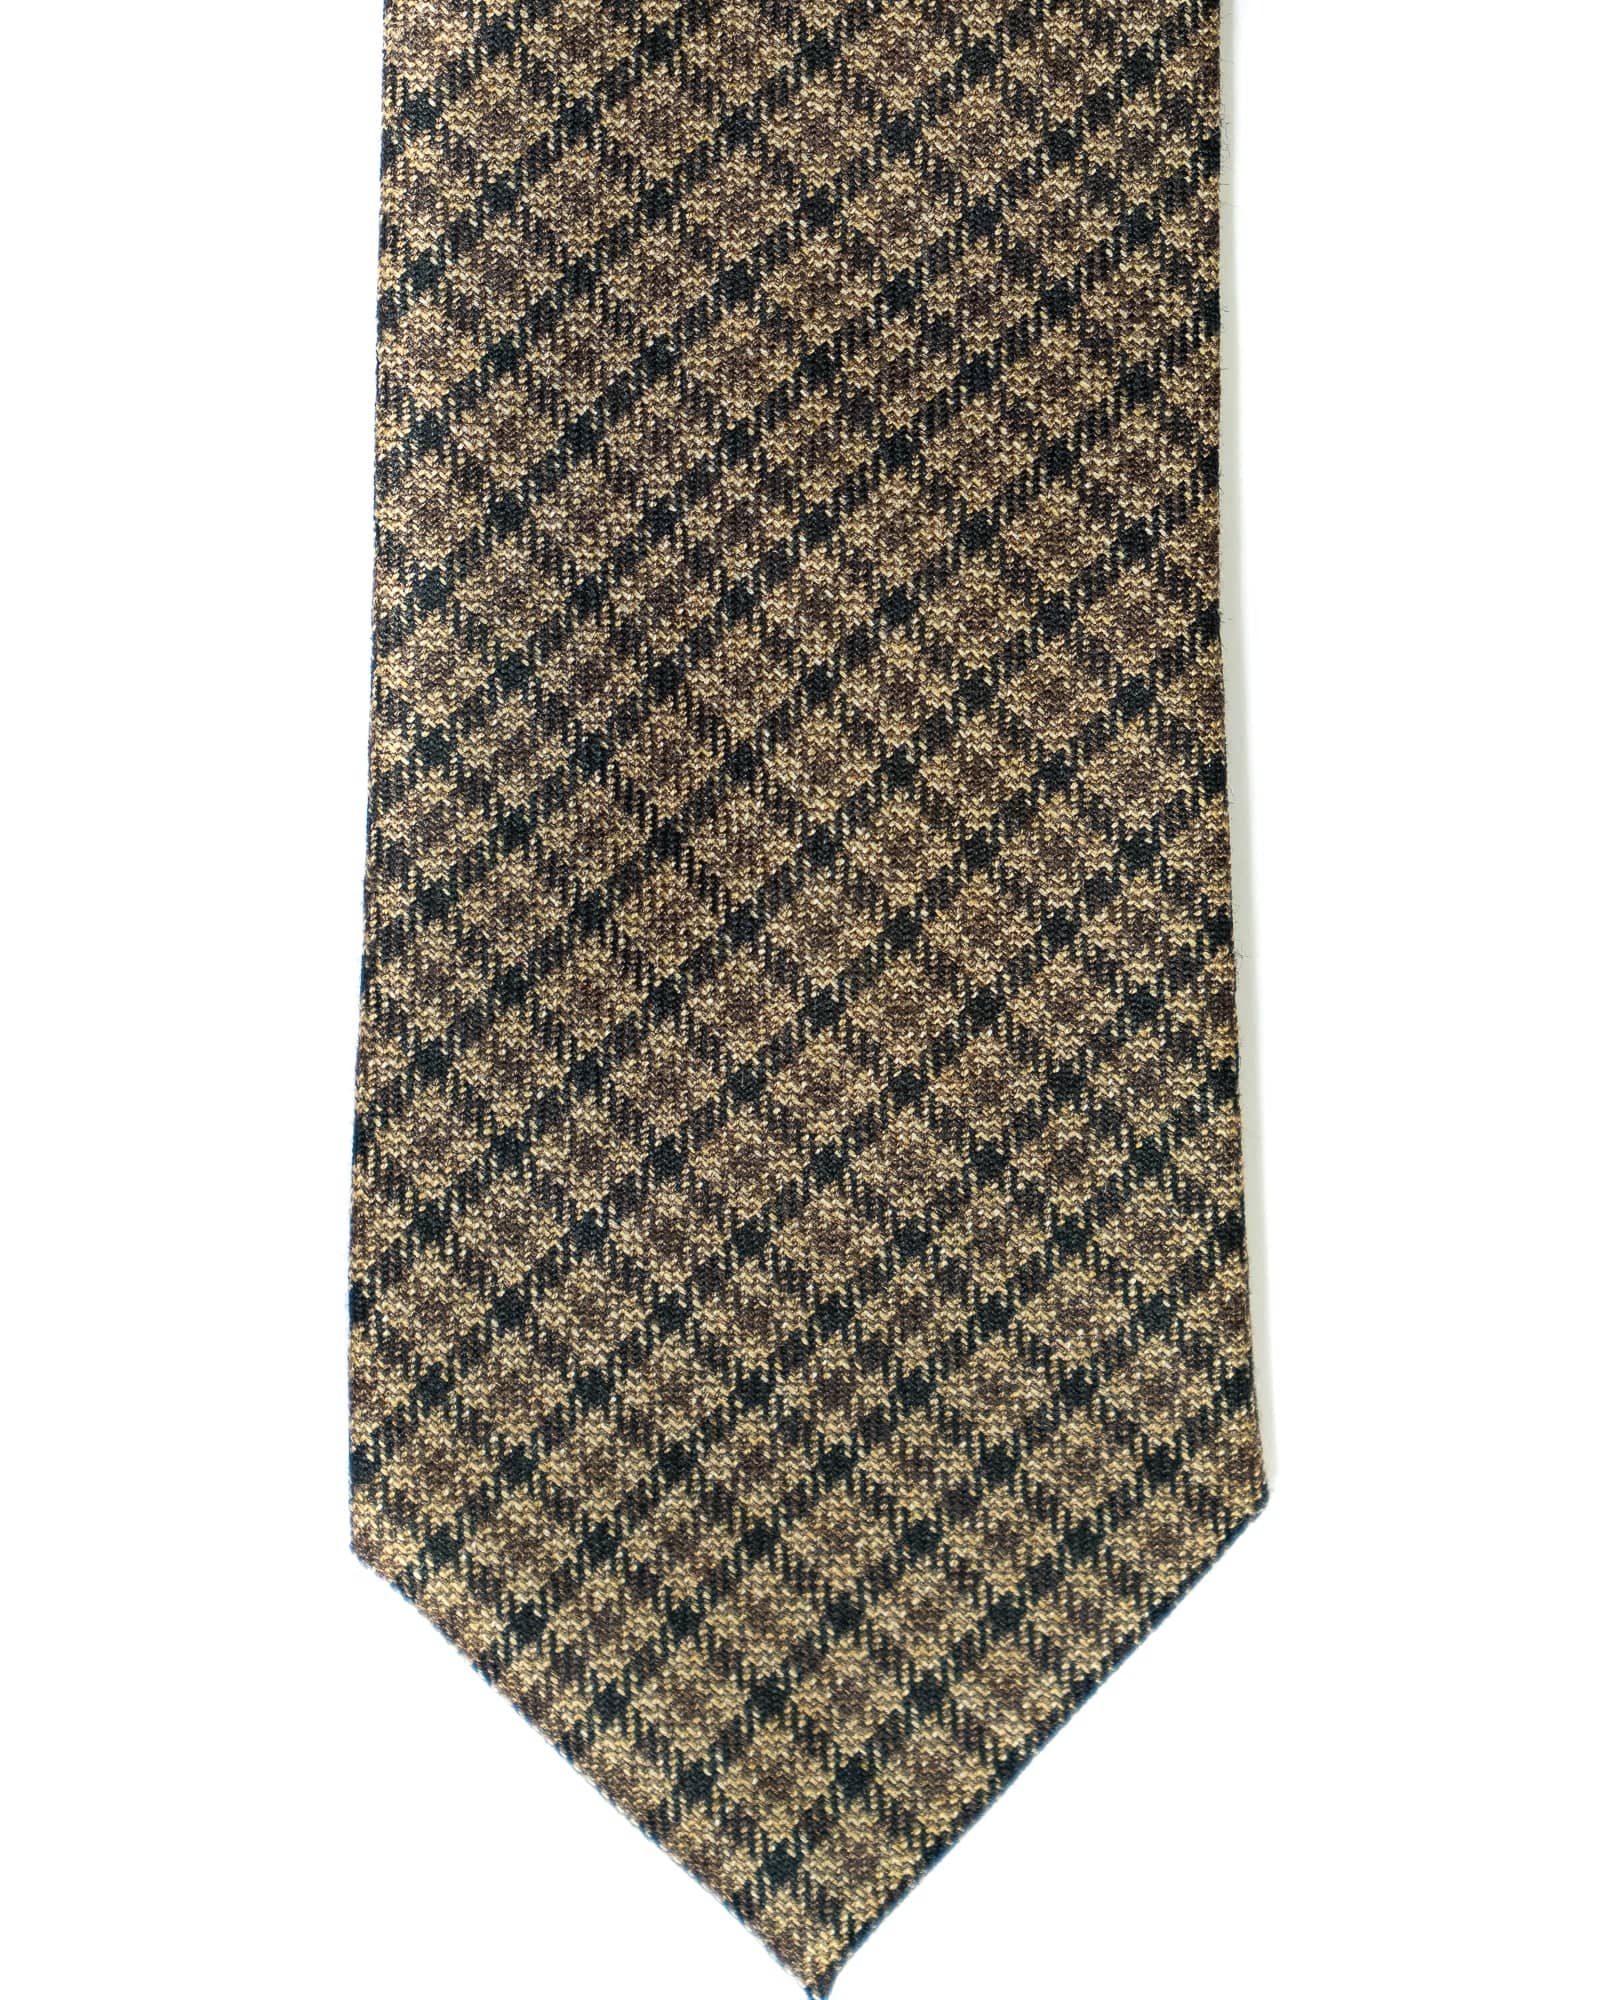 Silk And Wool Tie In  Brown And Navy Check - Rainwater's Men's Clothing and Tuxedo Rental